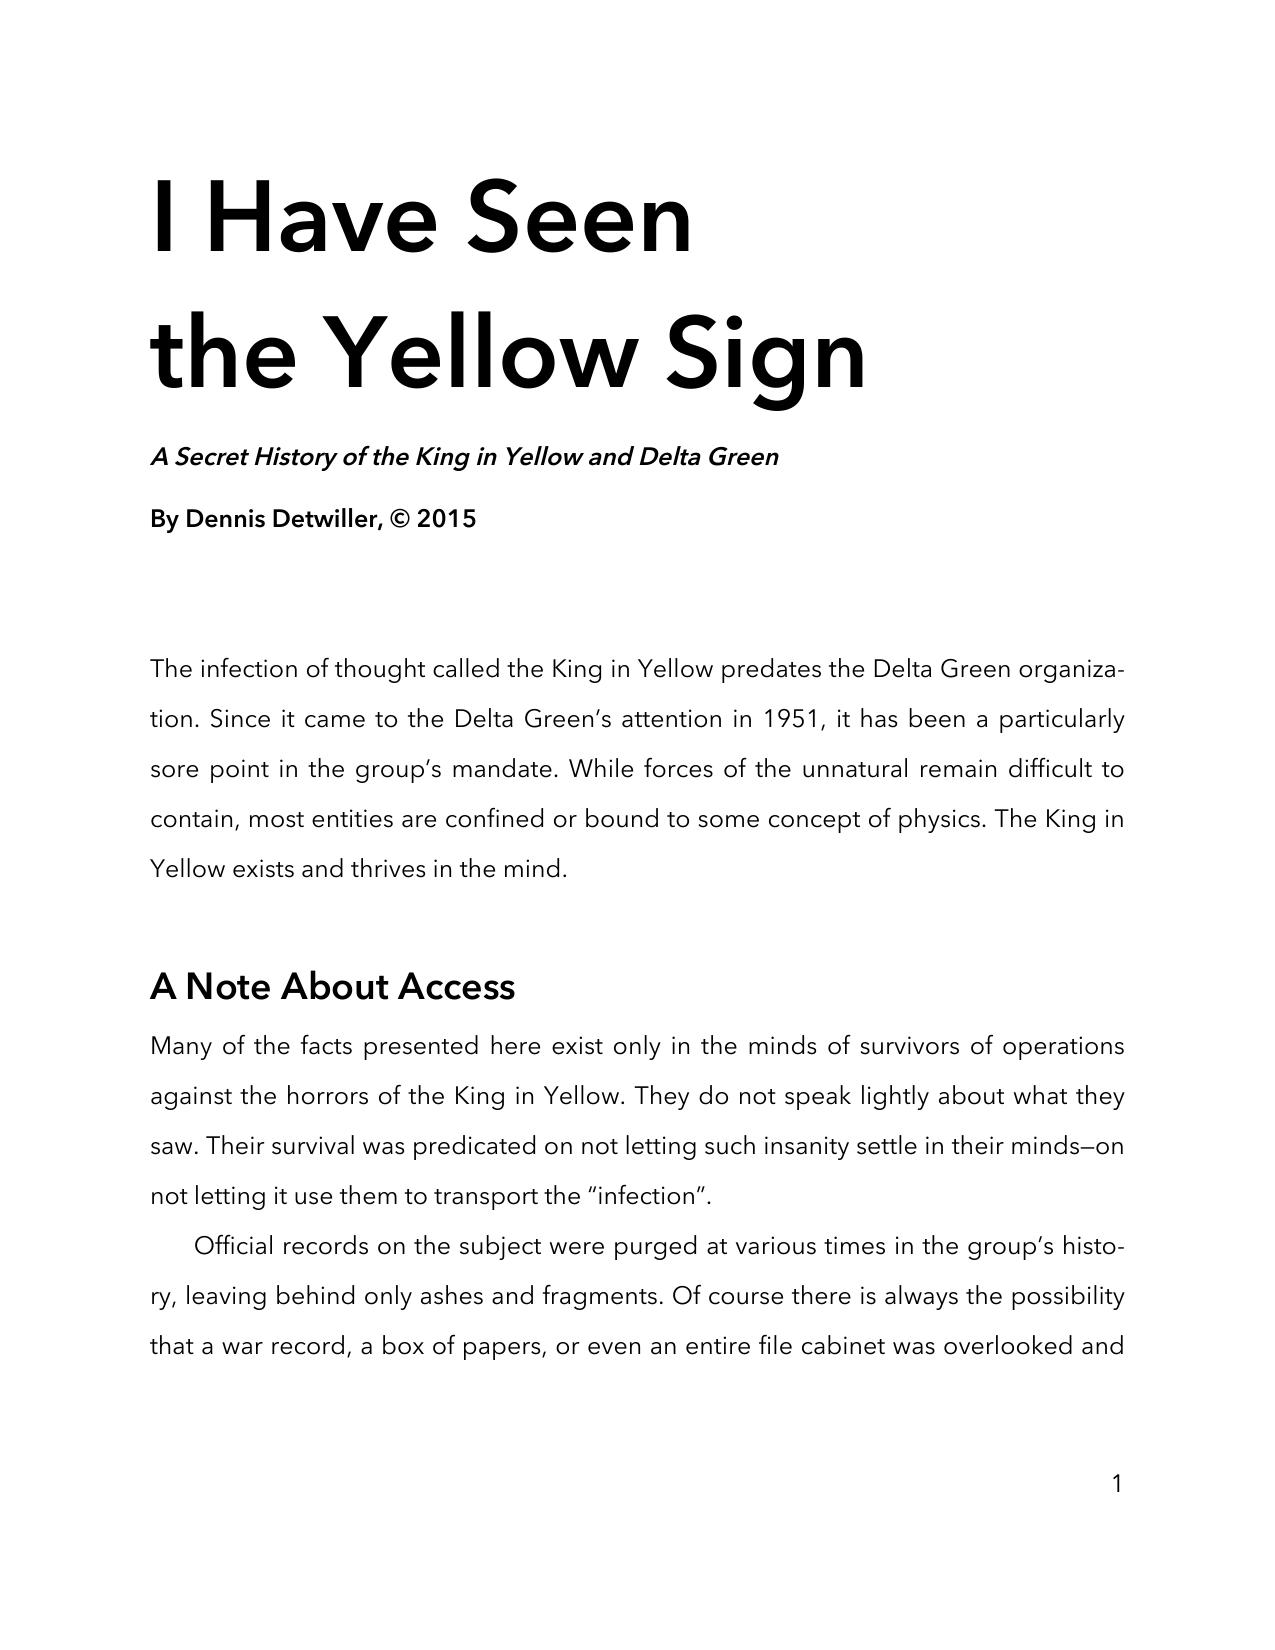 Microsoft Word - I Have Seen the Yellow Sign si edit.docx